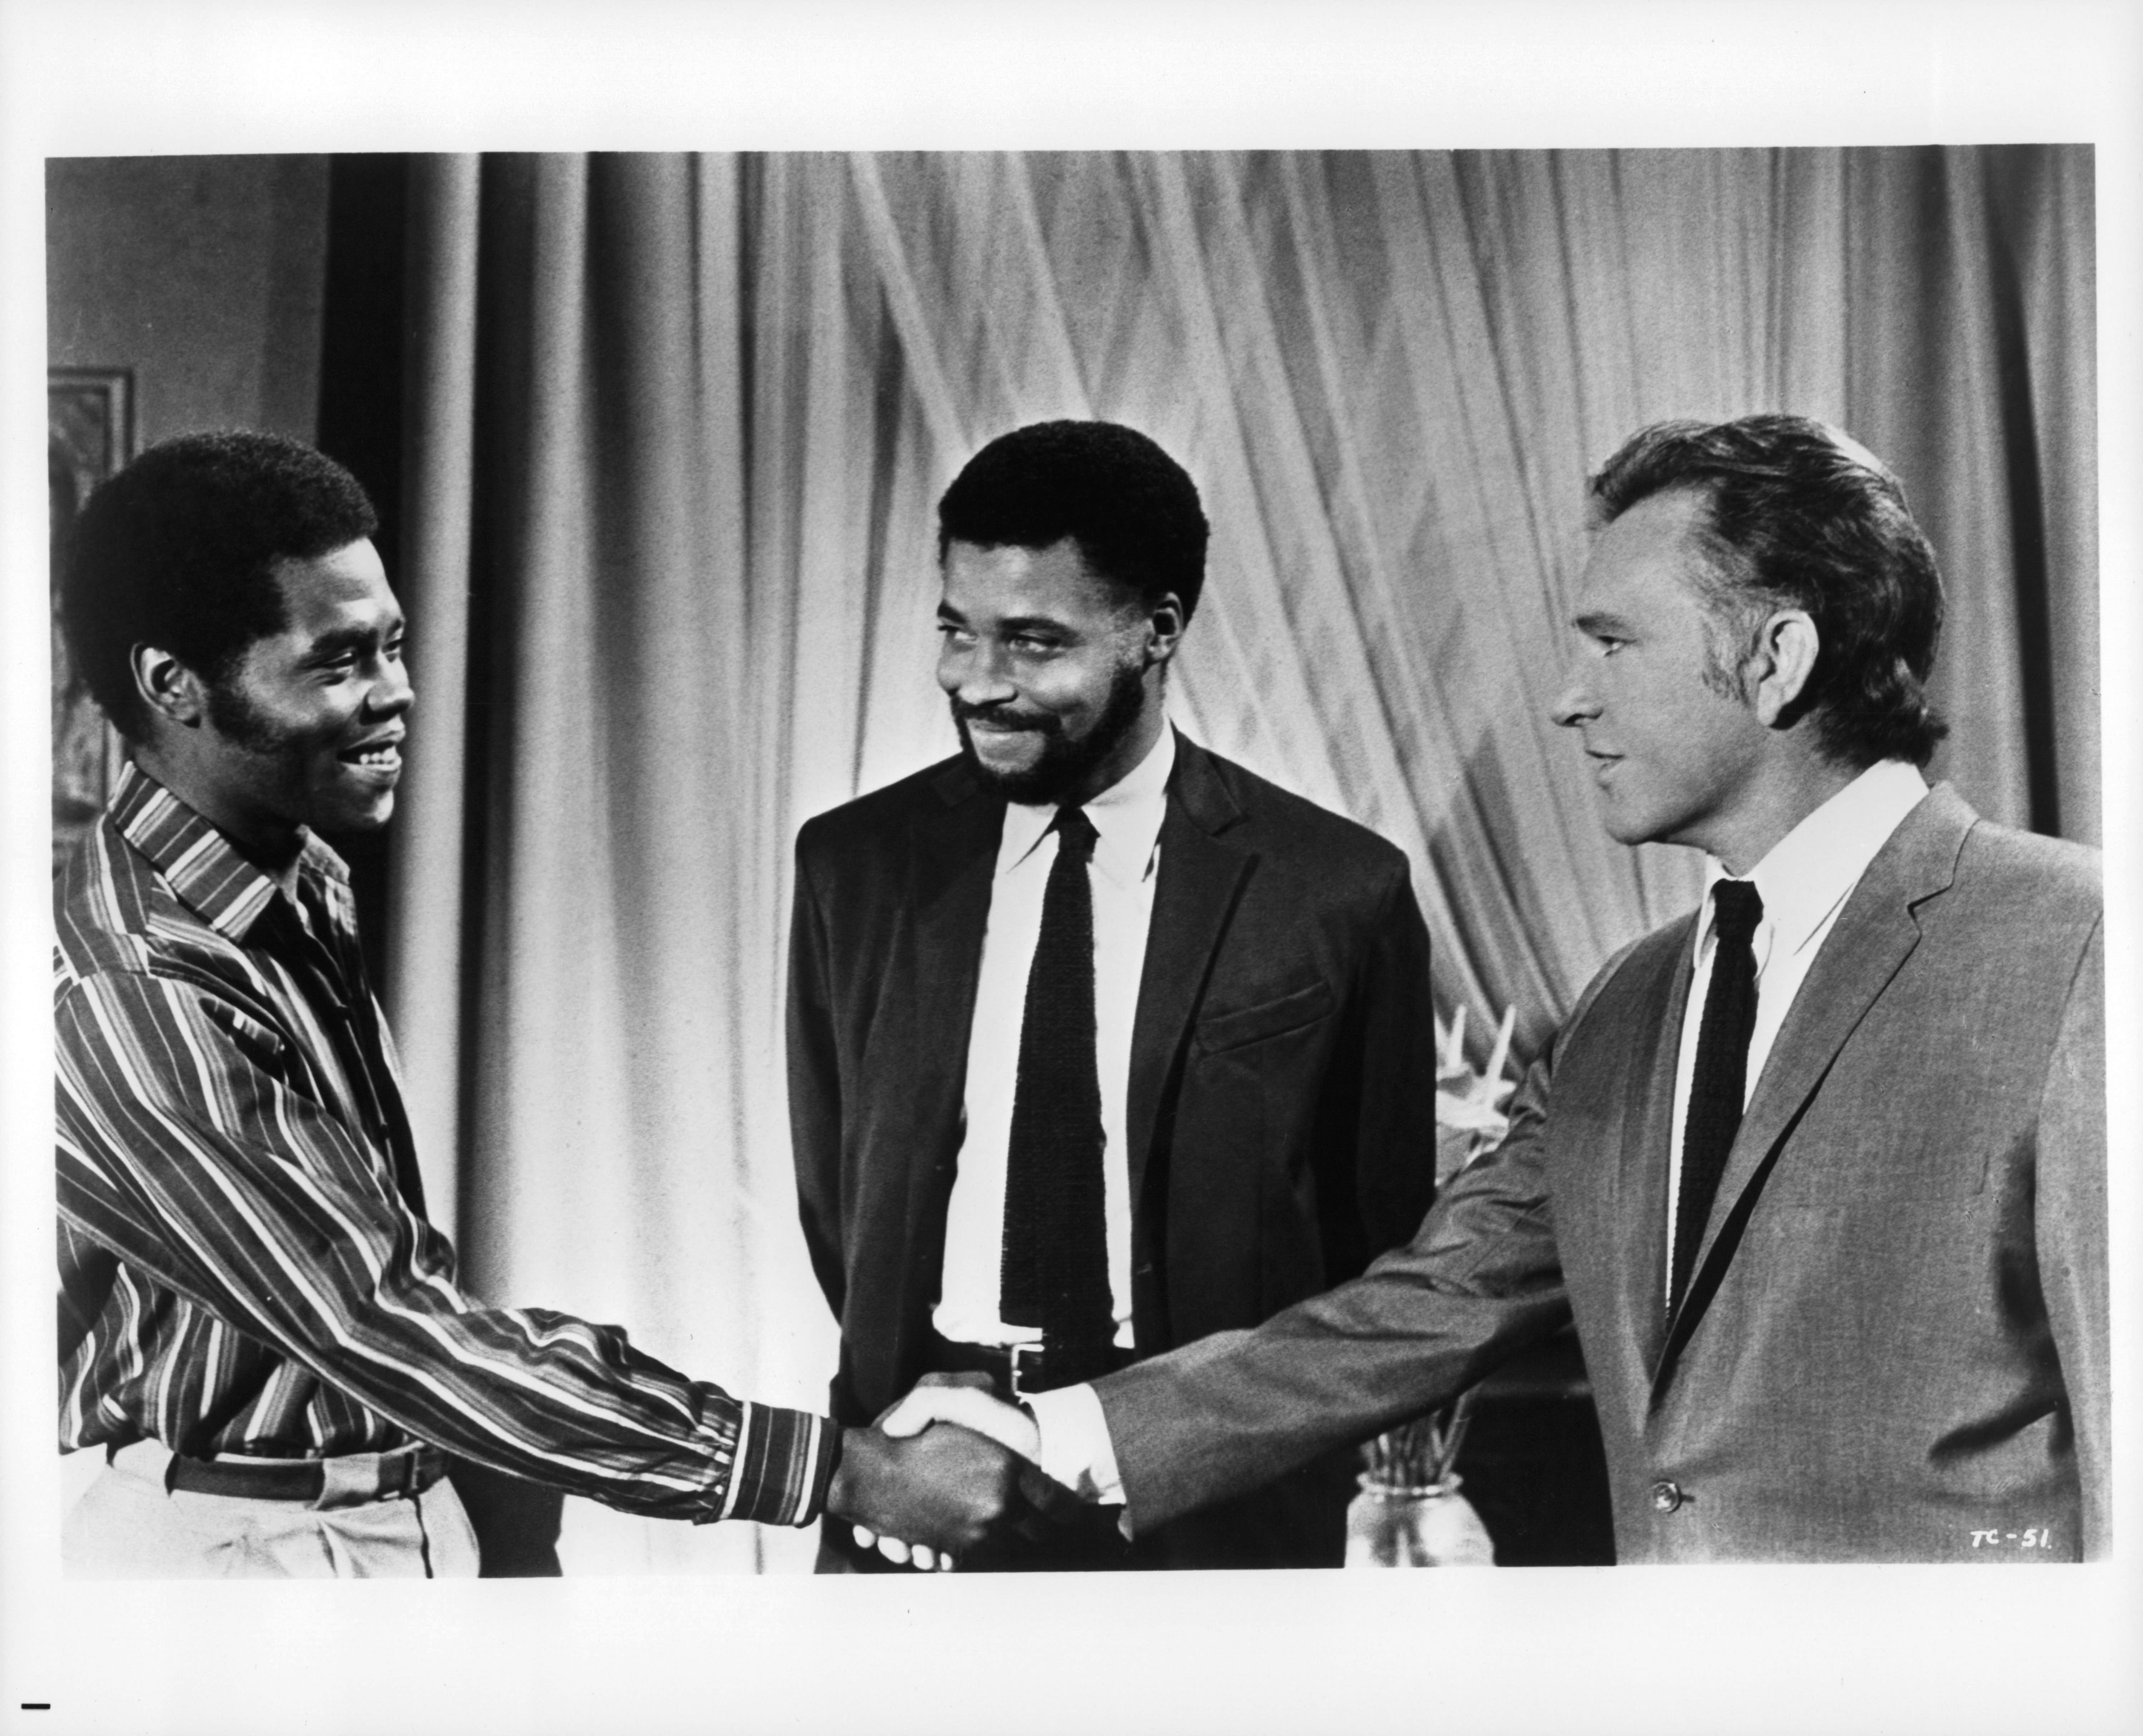 James standing between Richard Burton and Georg Stanford Brown, who are shaking hands